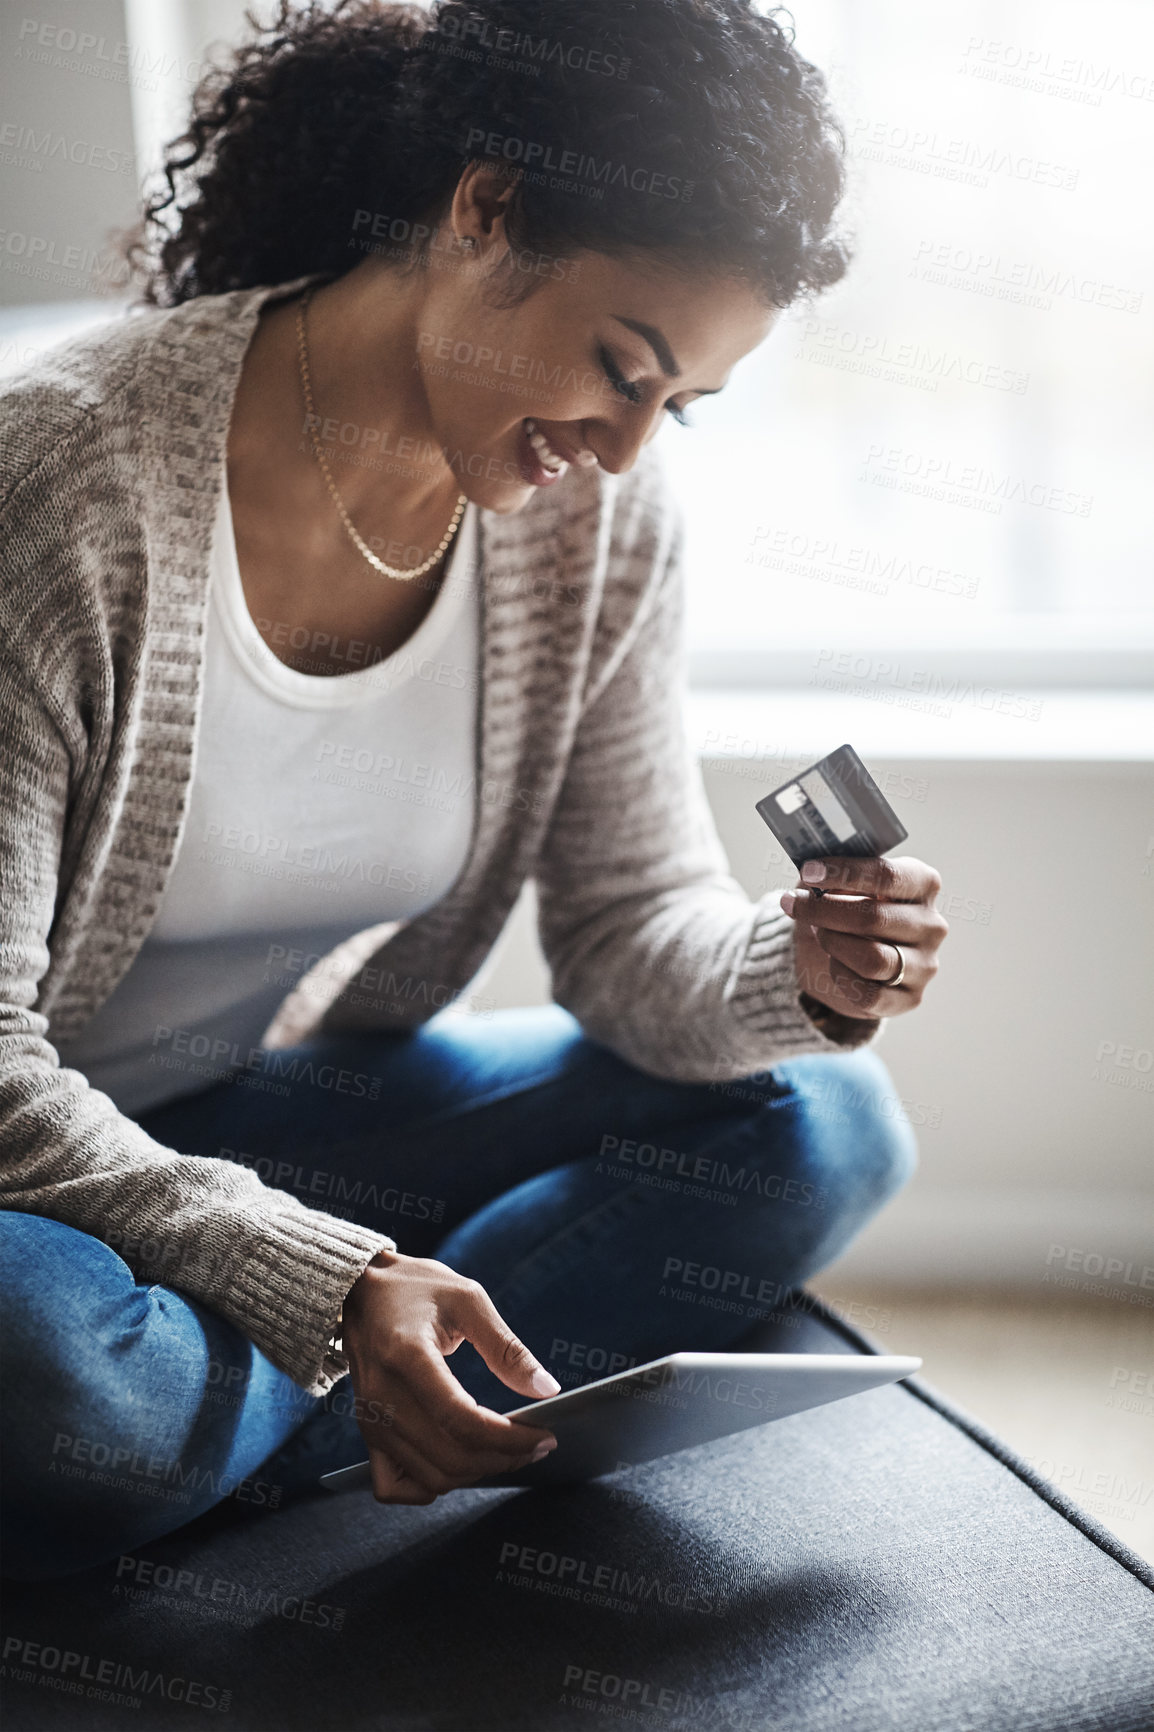 Buy stock photo Shot of an attractive young woman using a digital tablet and credit card at home